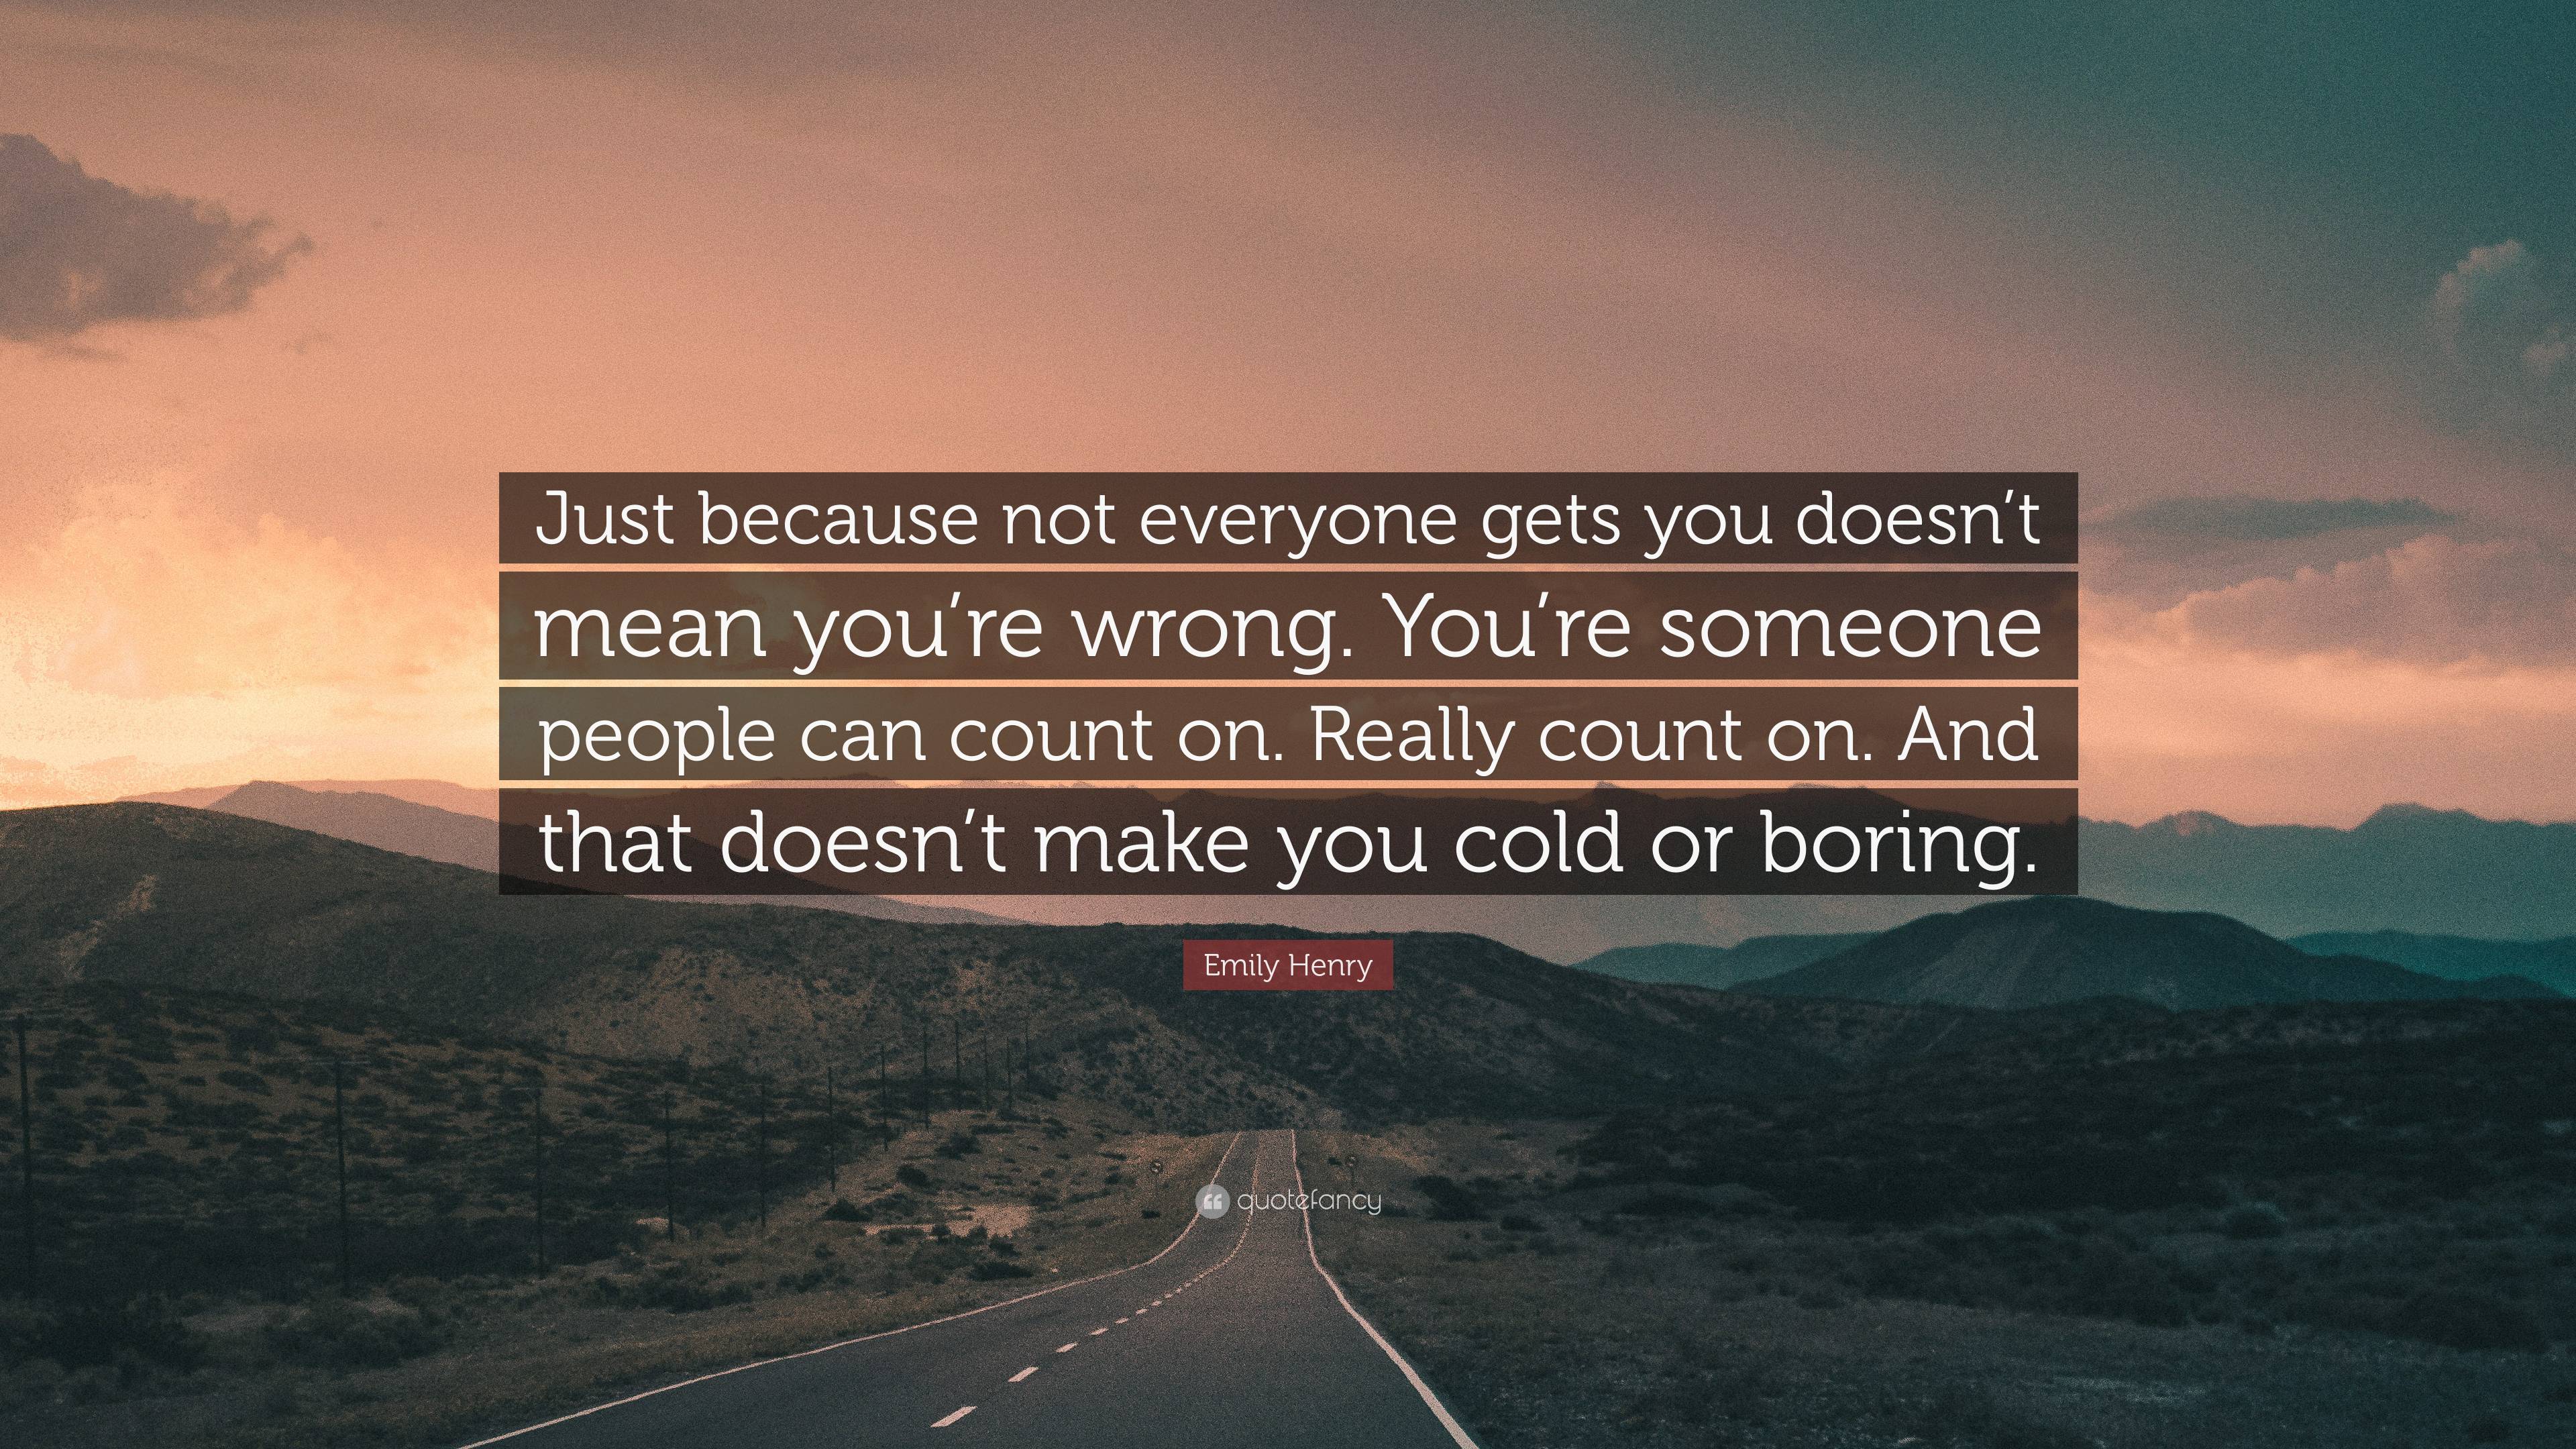 https://quotefancy.com/media/wallpaper/3840x2160/7198782-Emily-Henry-Quote-Just-because-not-everyone-gets-you-doesn-t-mean.jpg